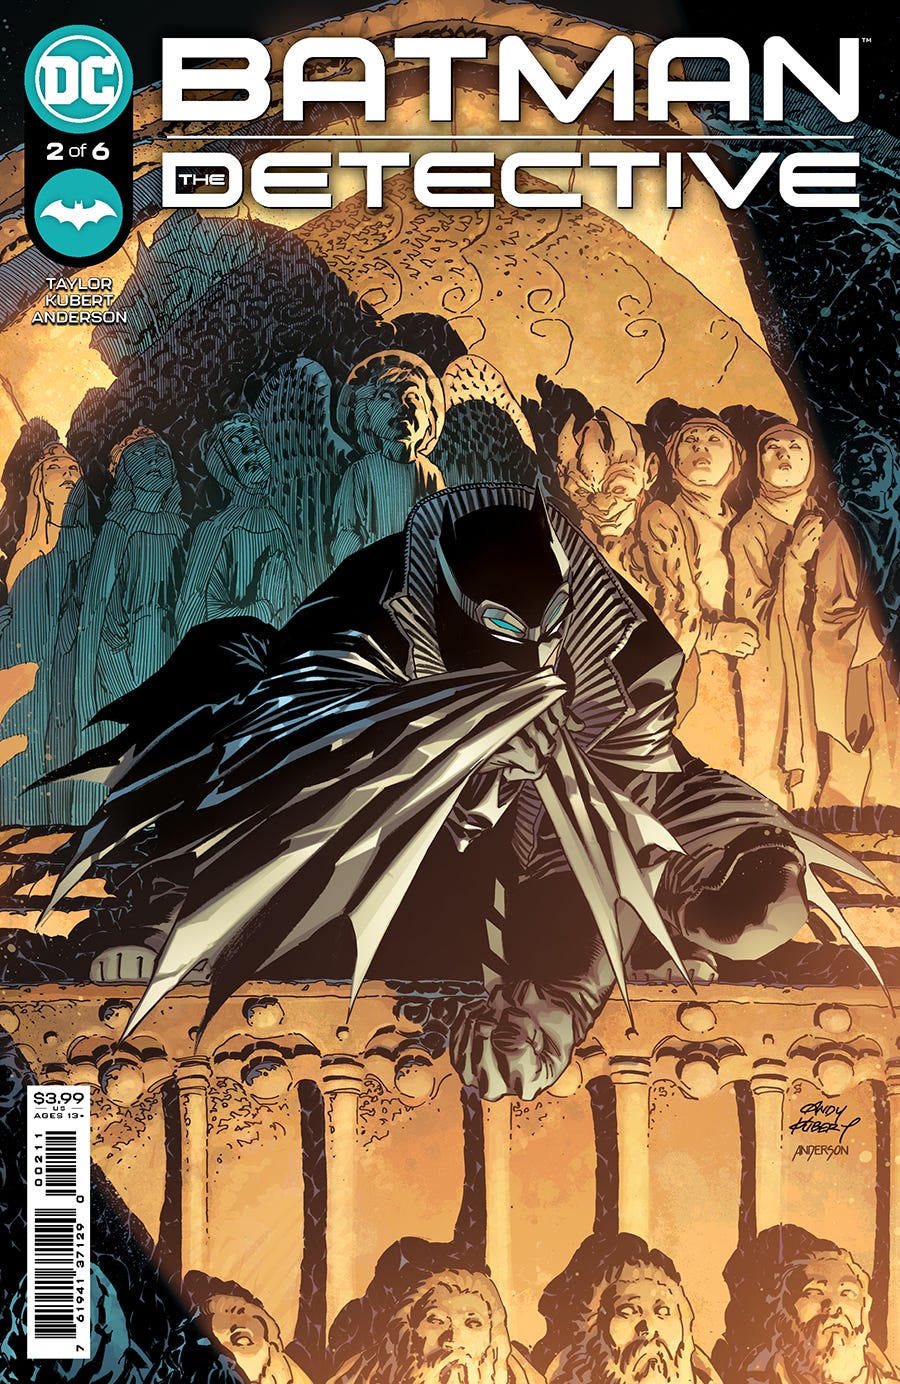 Batman the Detective #2 (of 6) (Cover A - Andy Kubert)